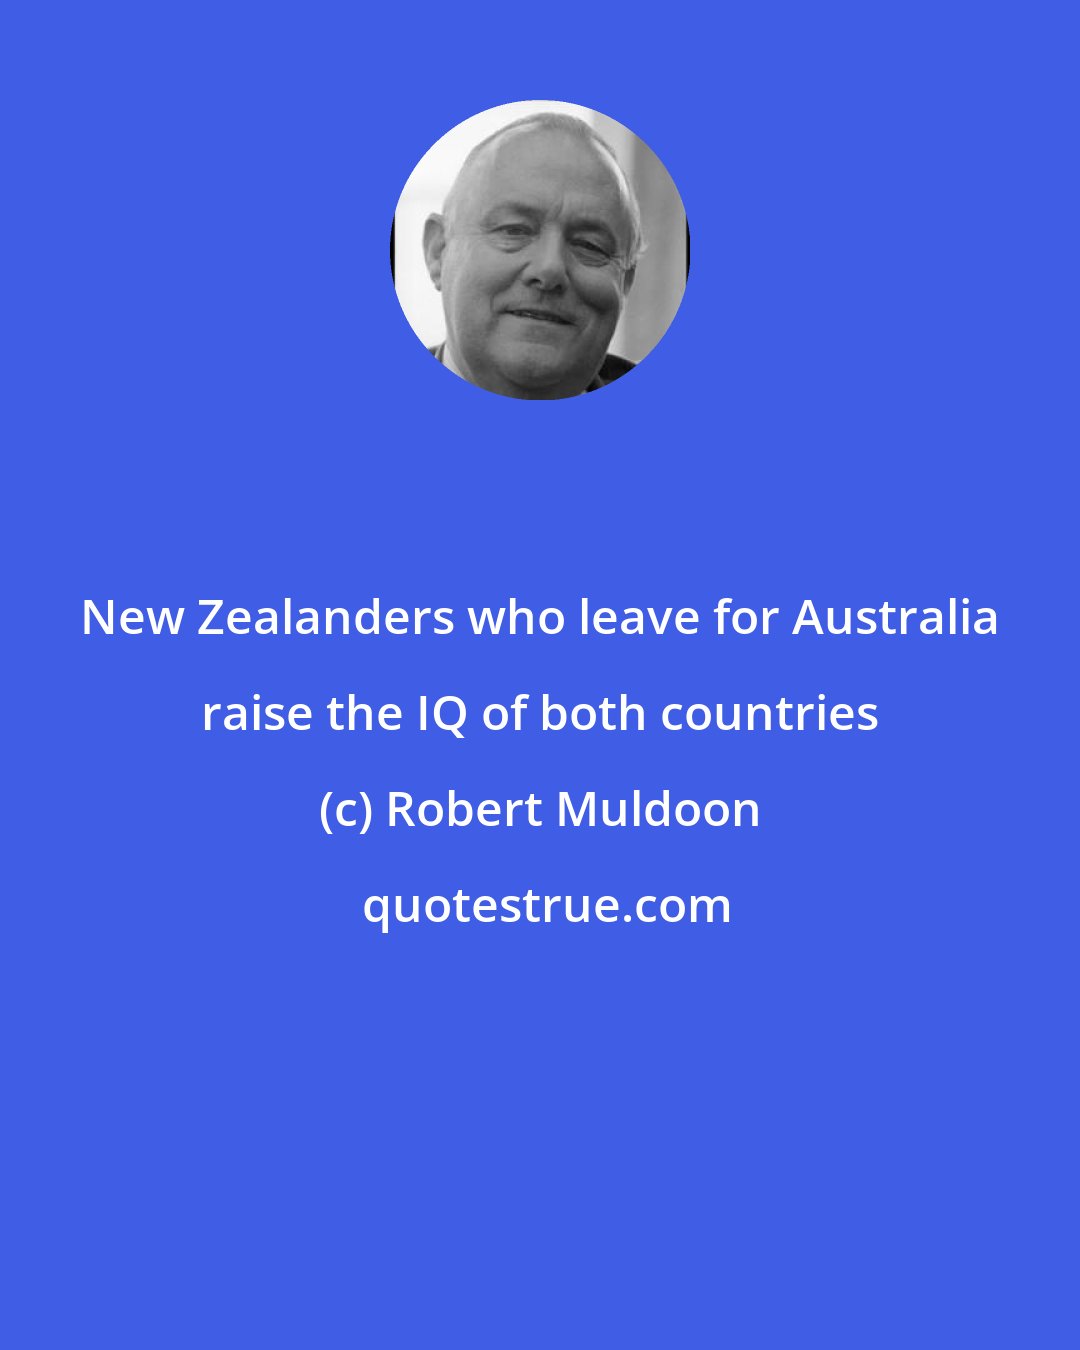 Robert Muldoon: New Zealanders who leave for Australia raise the IQ of both countries